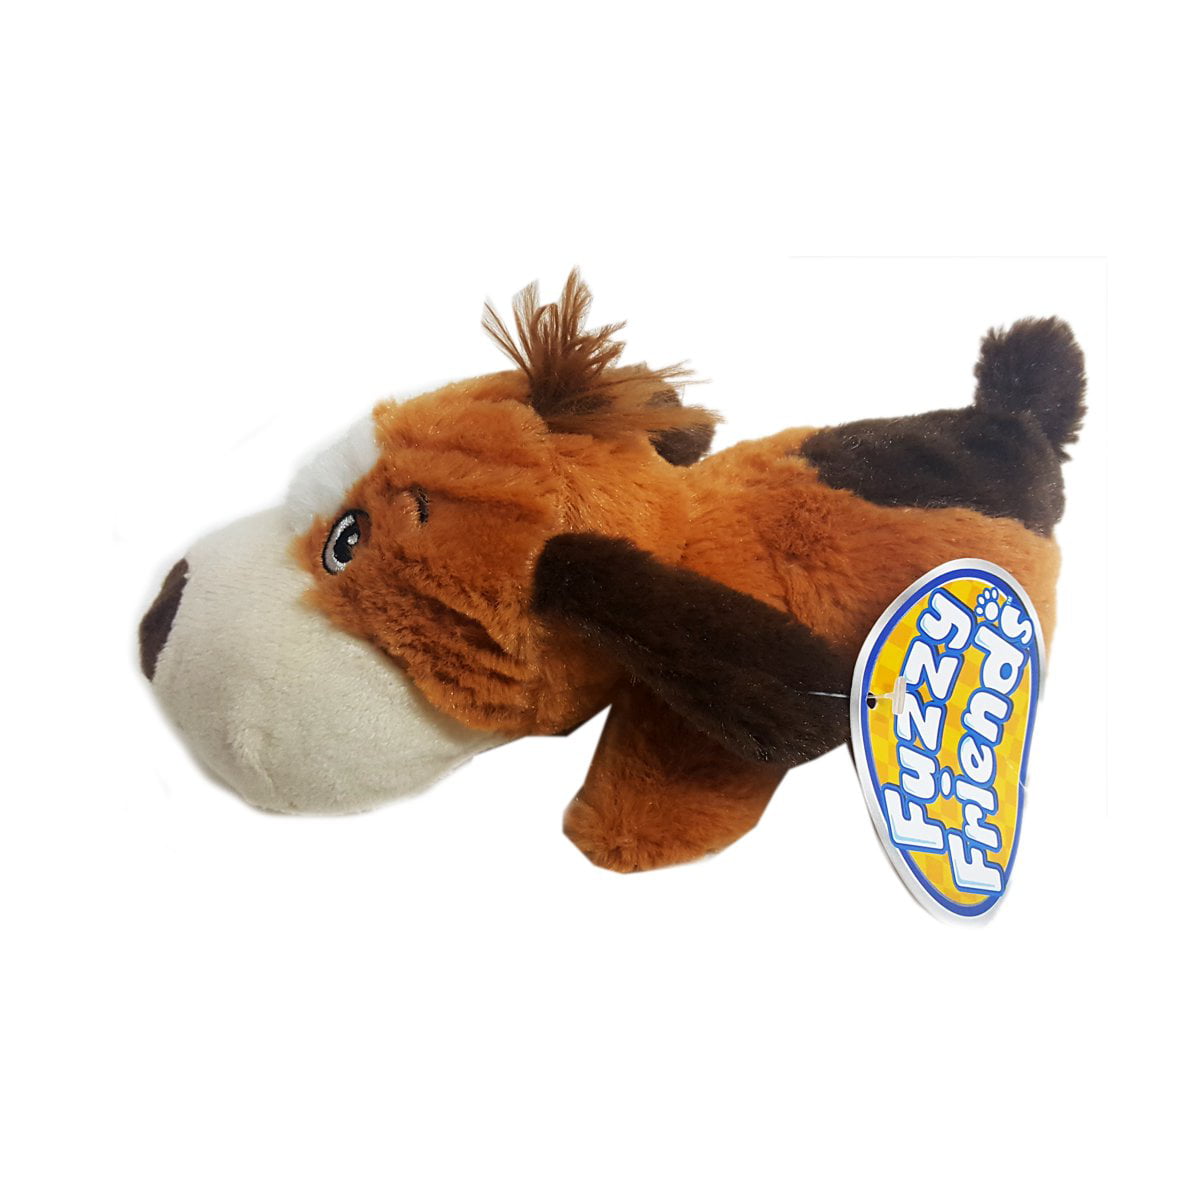 NEW Fuzzy Friends Puppy Dog Stuffed Animal Toy for AGES 3+